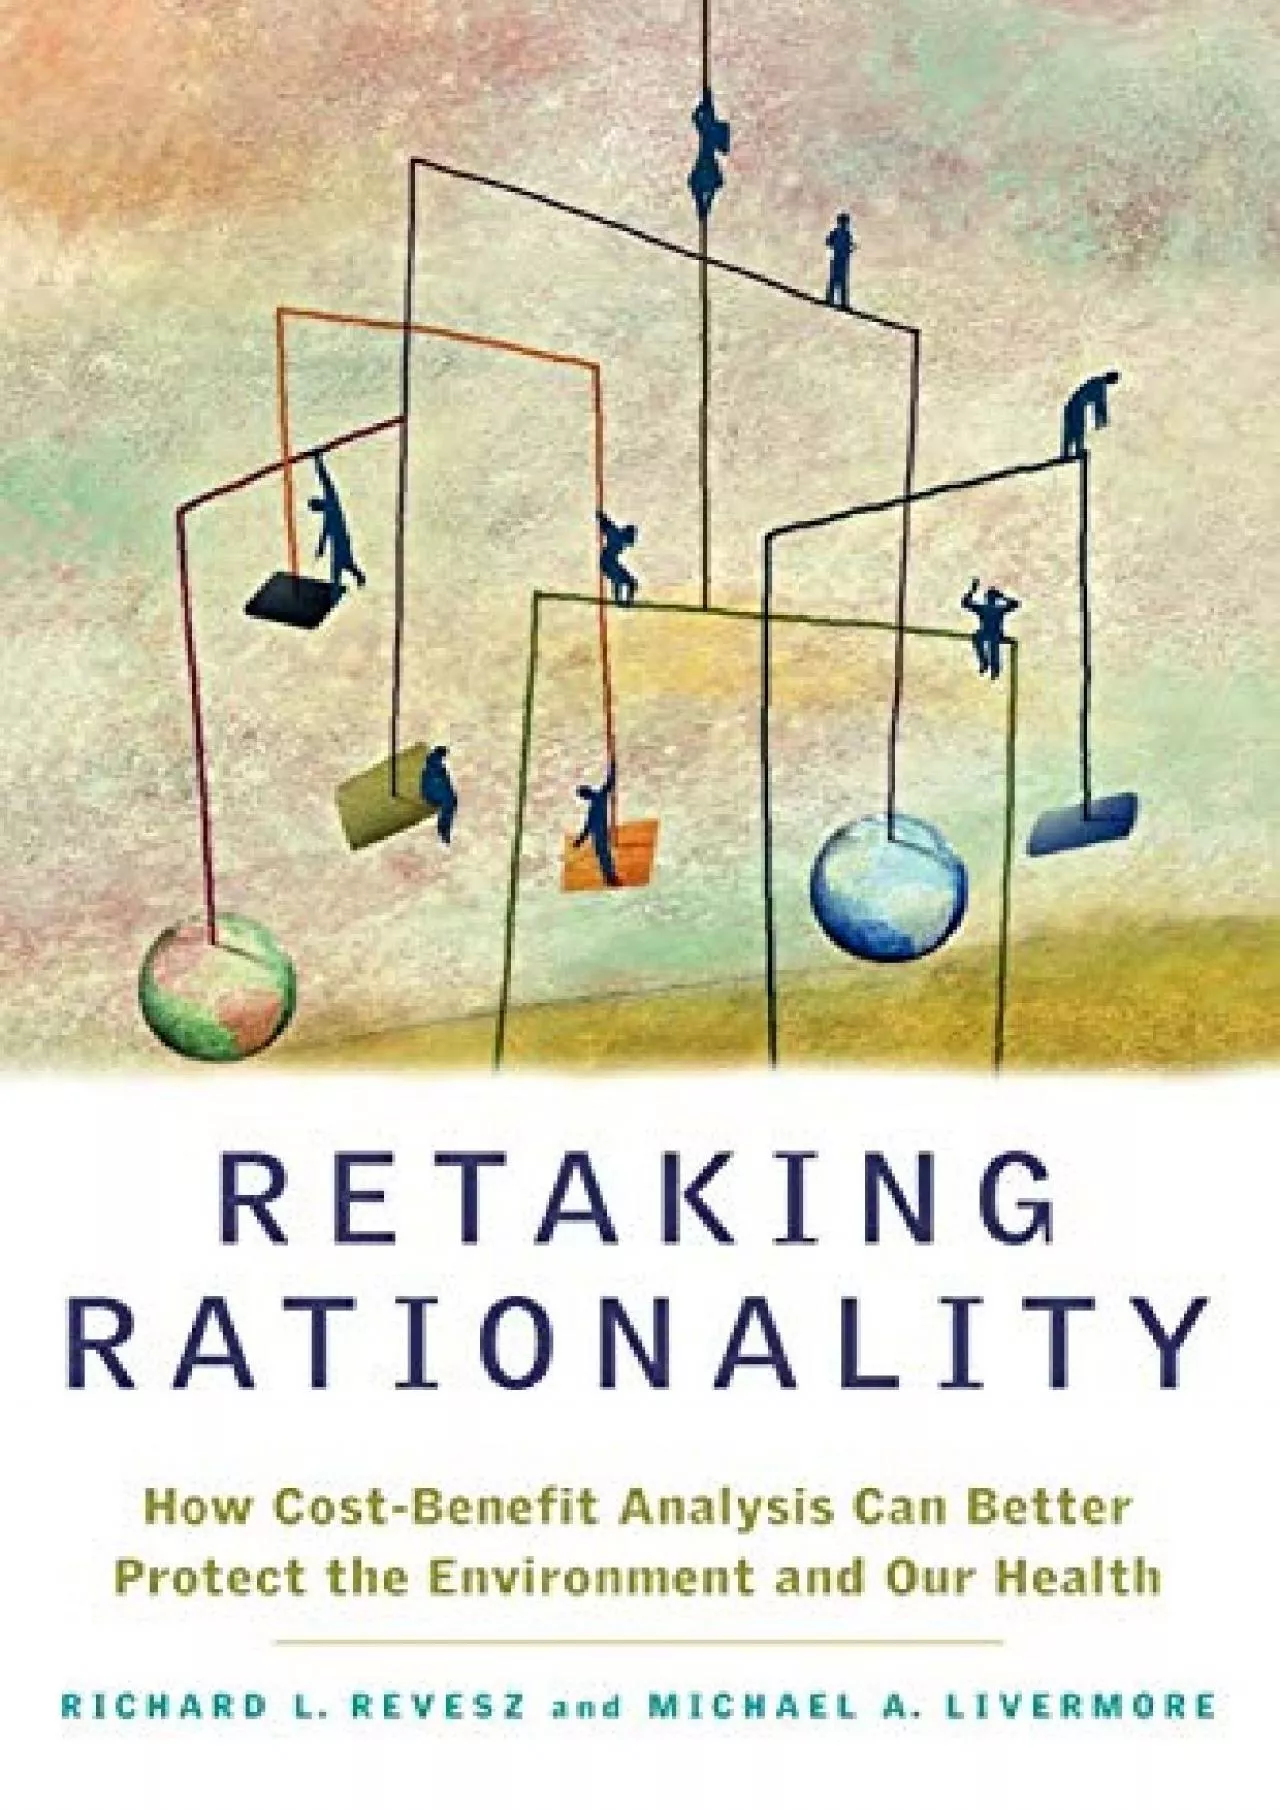 [PDF READ ONLINE] Retaking Rationality: How Cost-Benefit Analysis Can Better Protect the